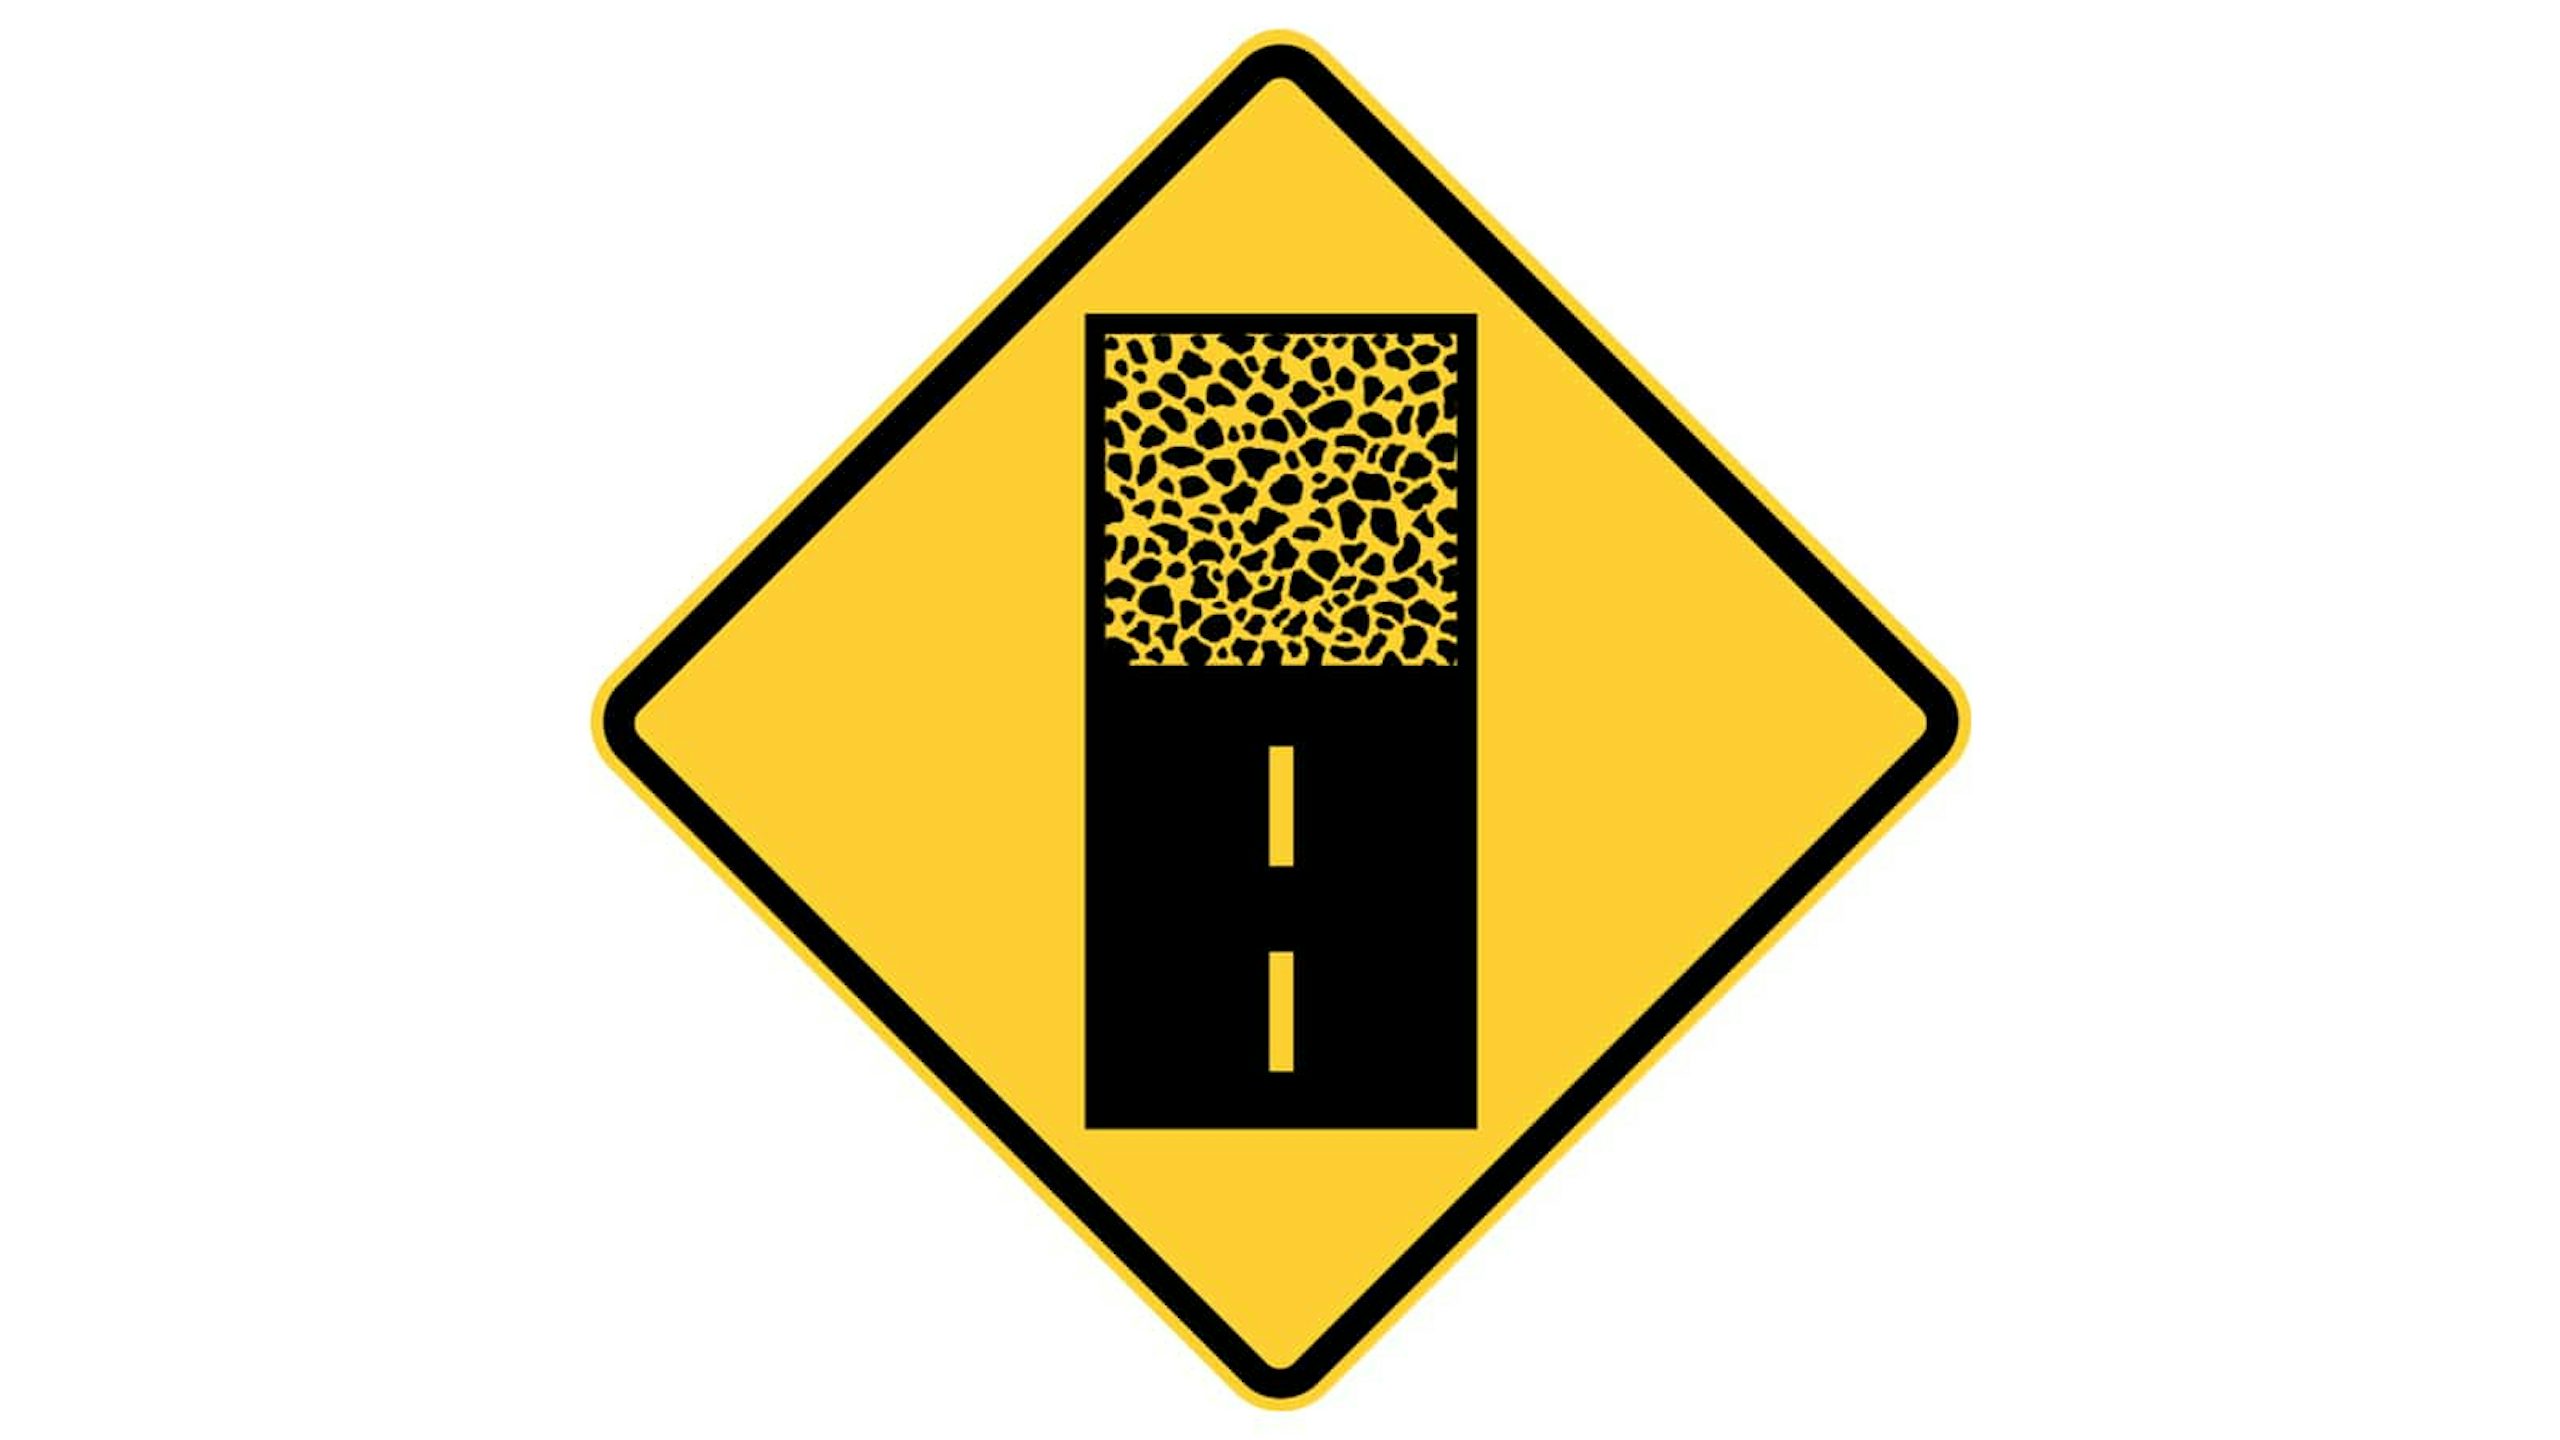 Warning sign Pavement Ends Ahead